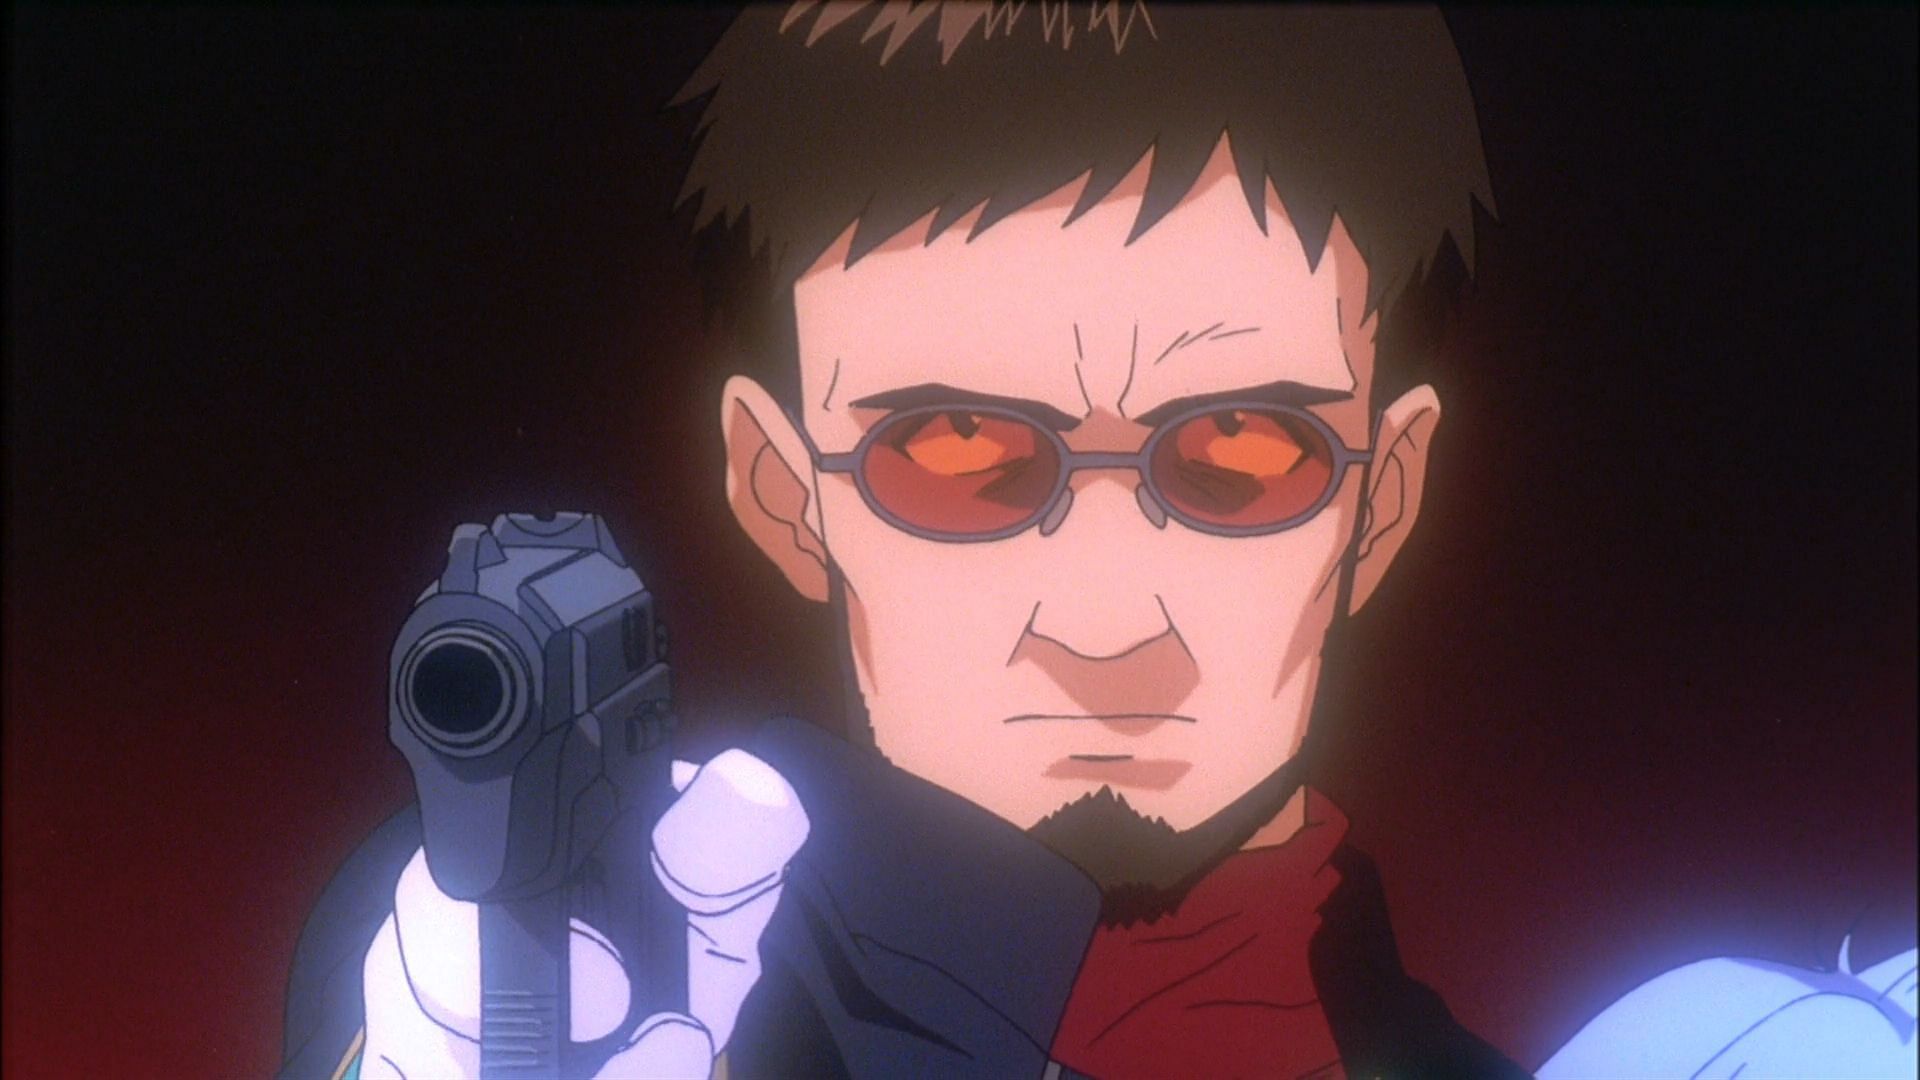 Gendo Ikari is among the most unlikeable parents in anime (Image by Studio Gainax)